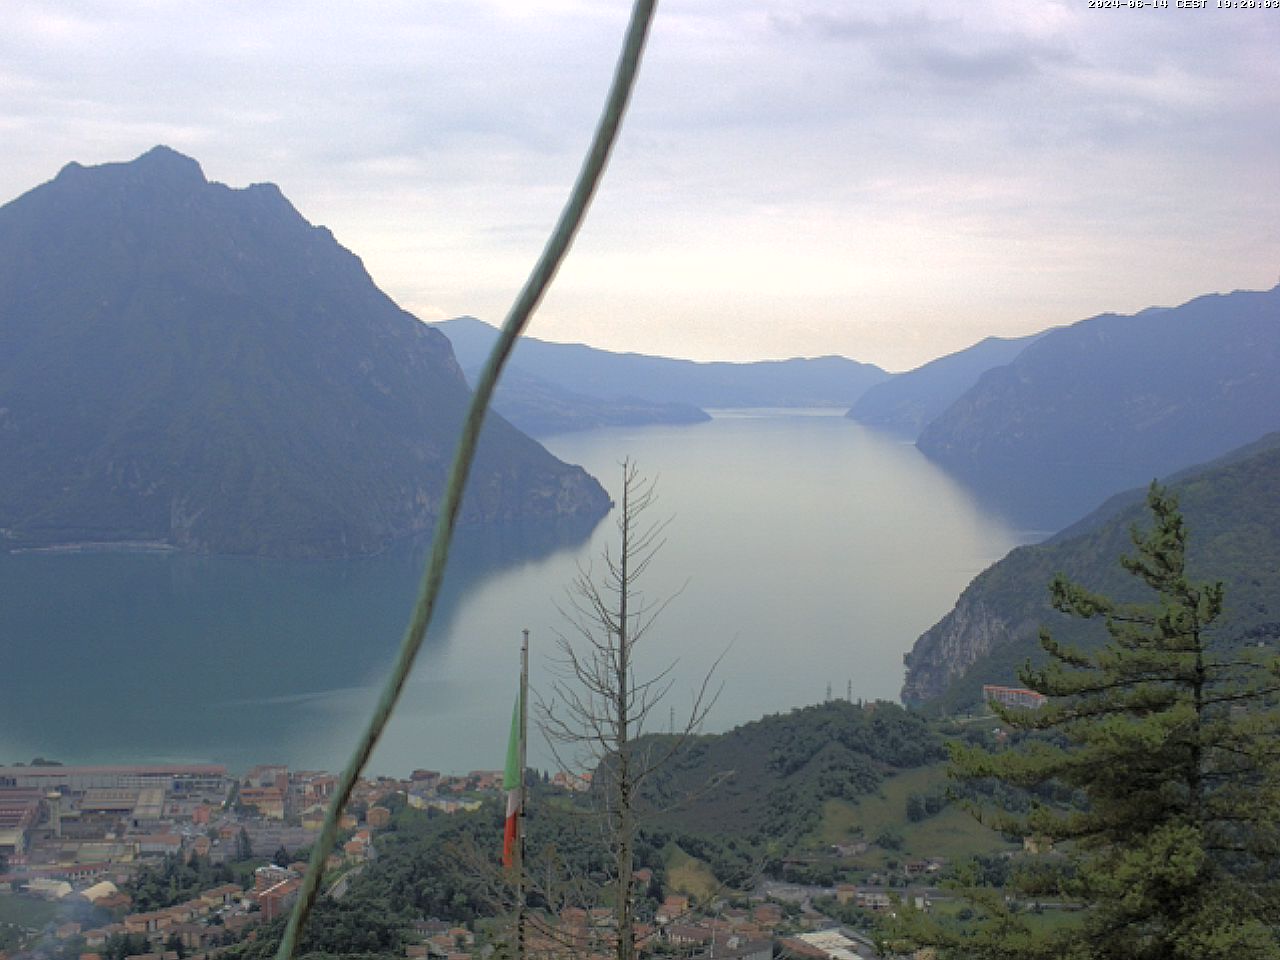 Lovere (Lac d'Iseo) Ma. 19:29